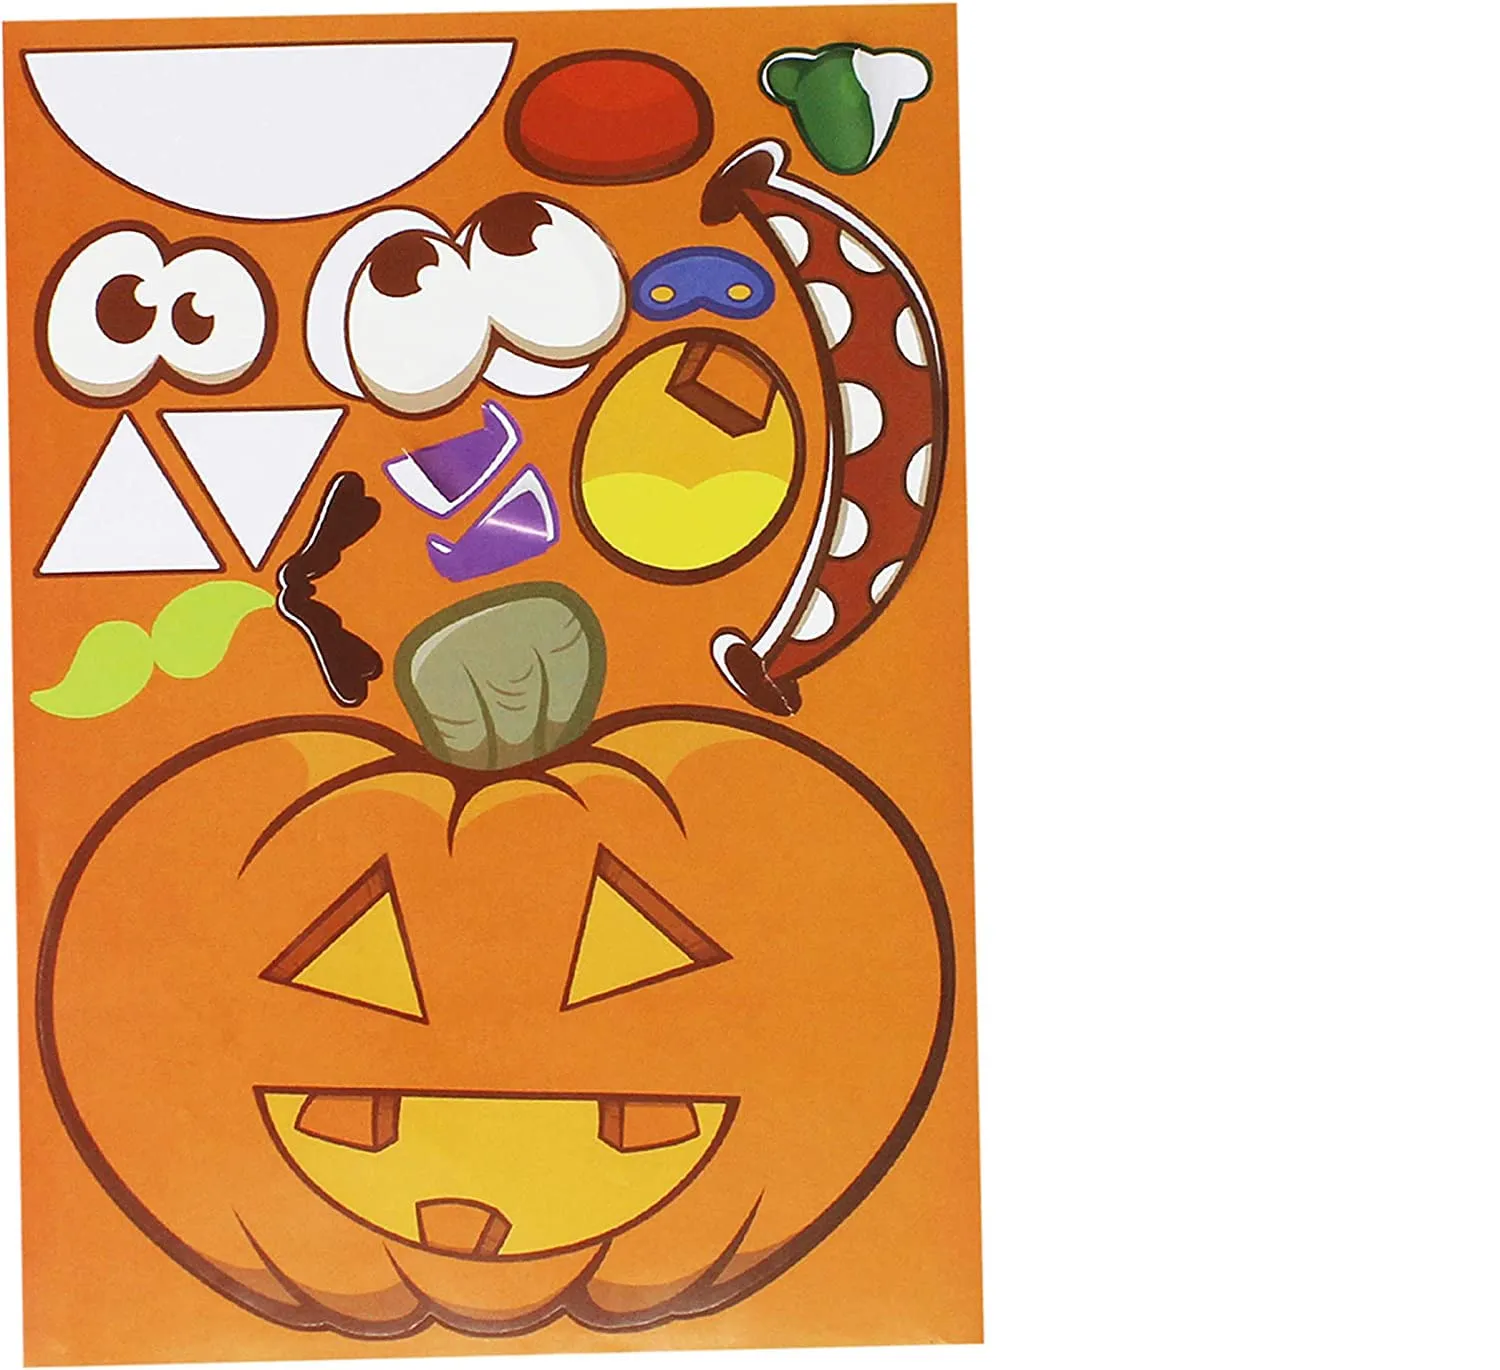 Spooky 24pcs Mix and Match Halloween Stickers Designs